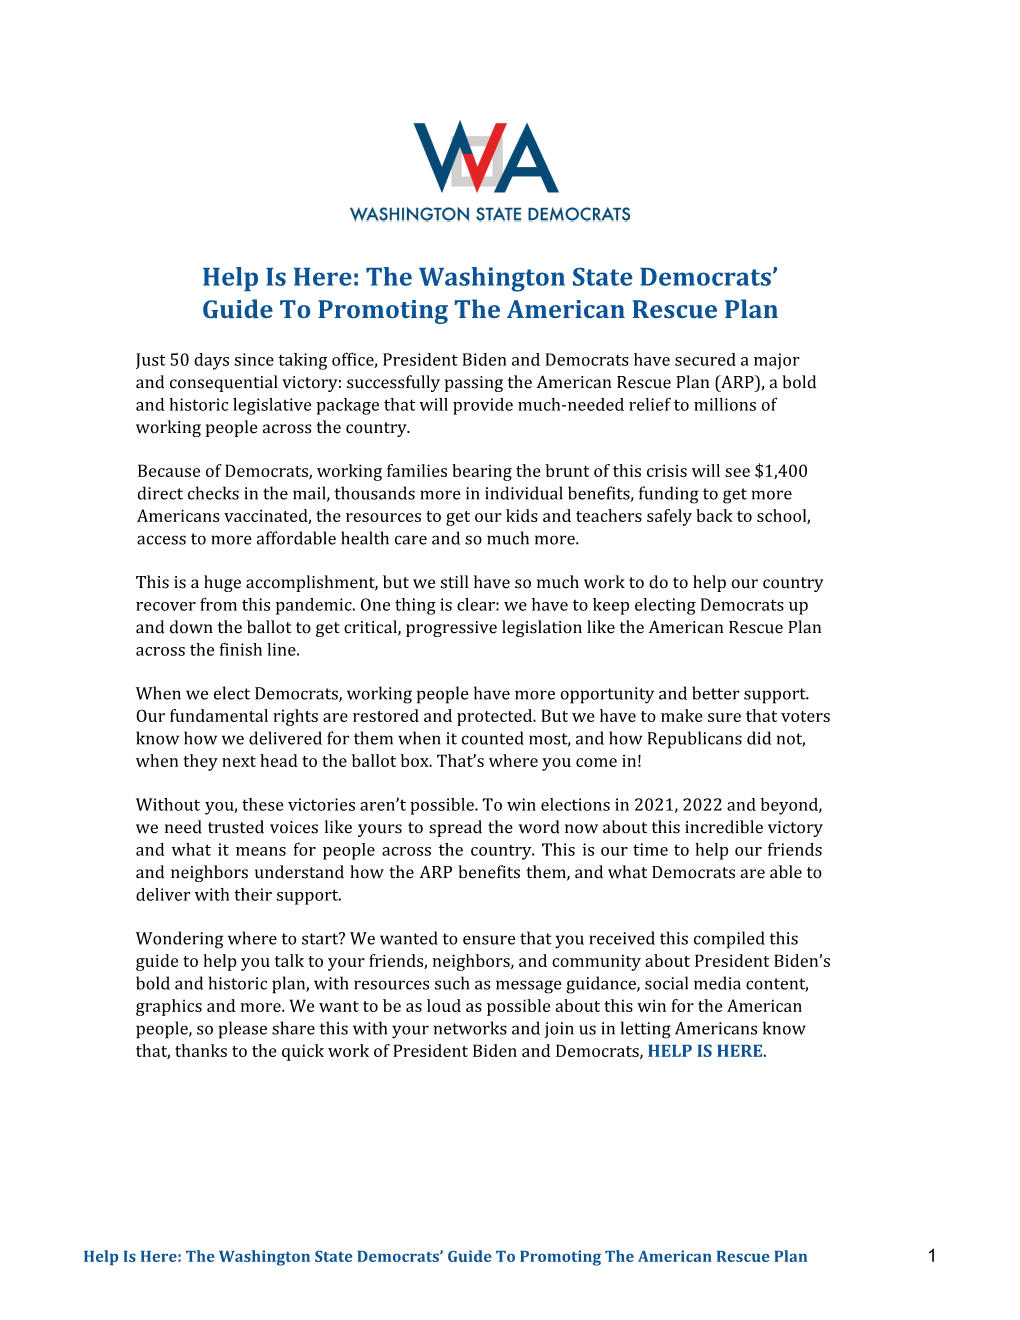 Help Is Here: the Washington State Democrats' Guide to Promoting